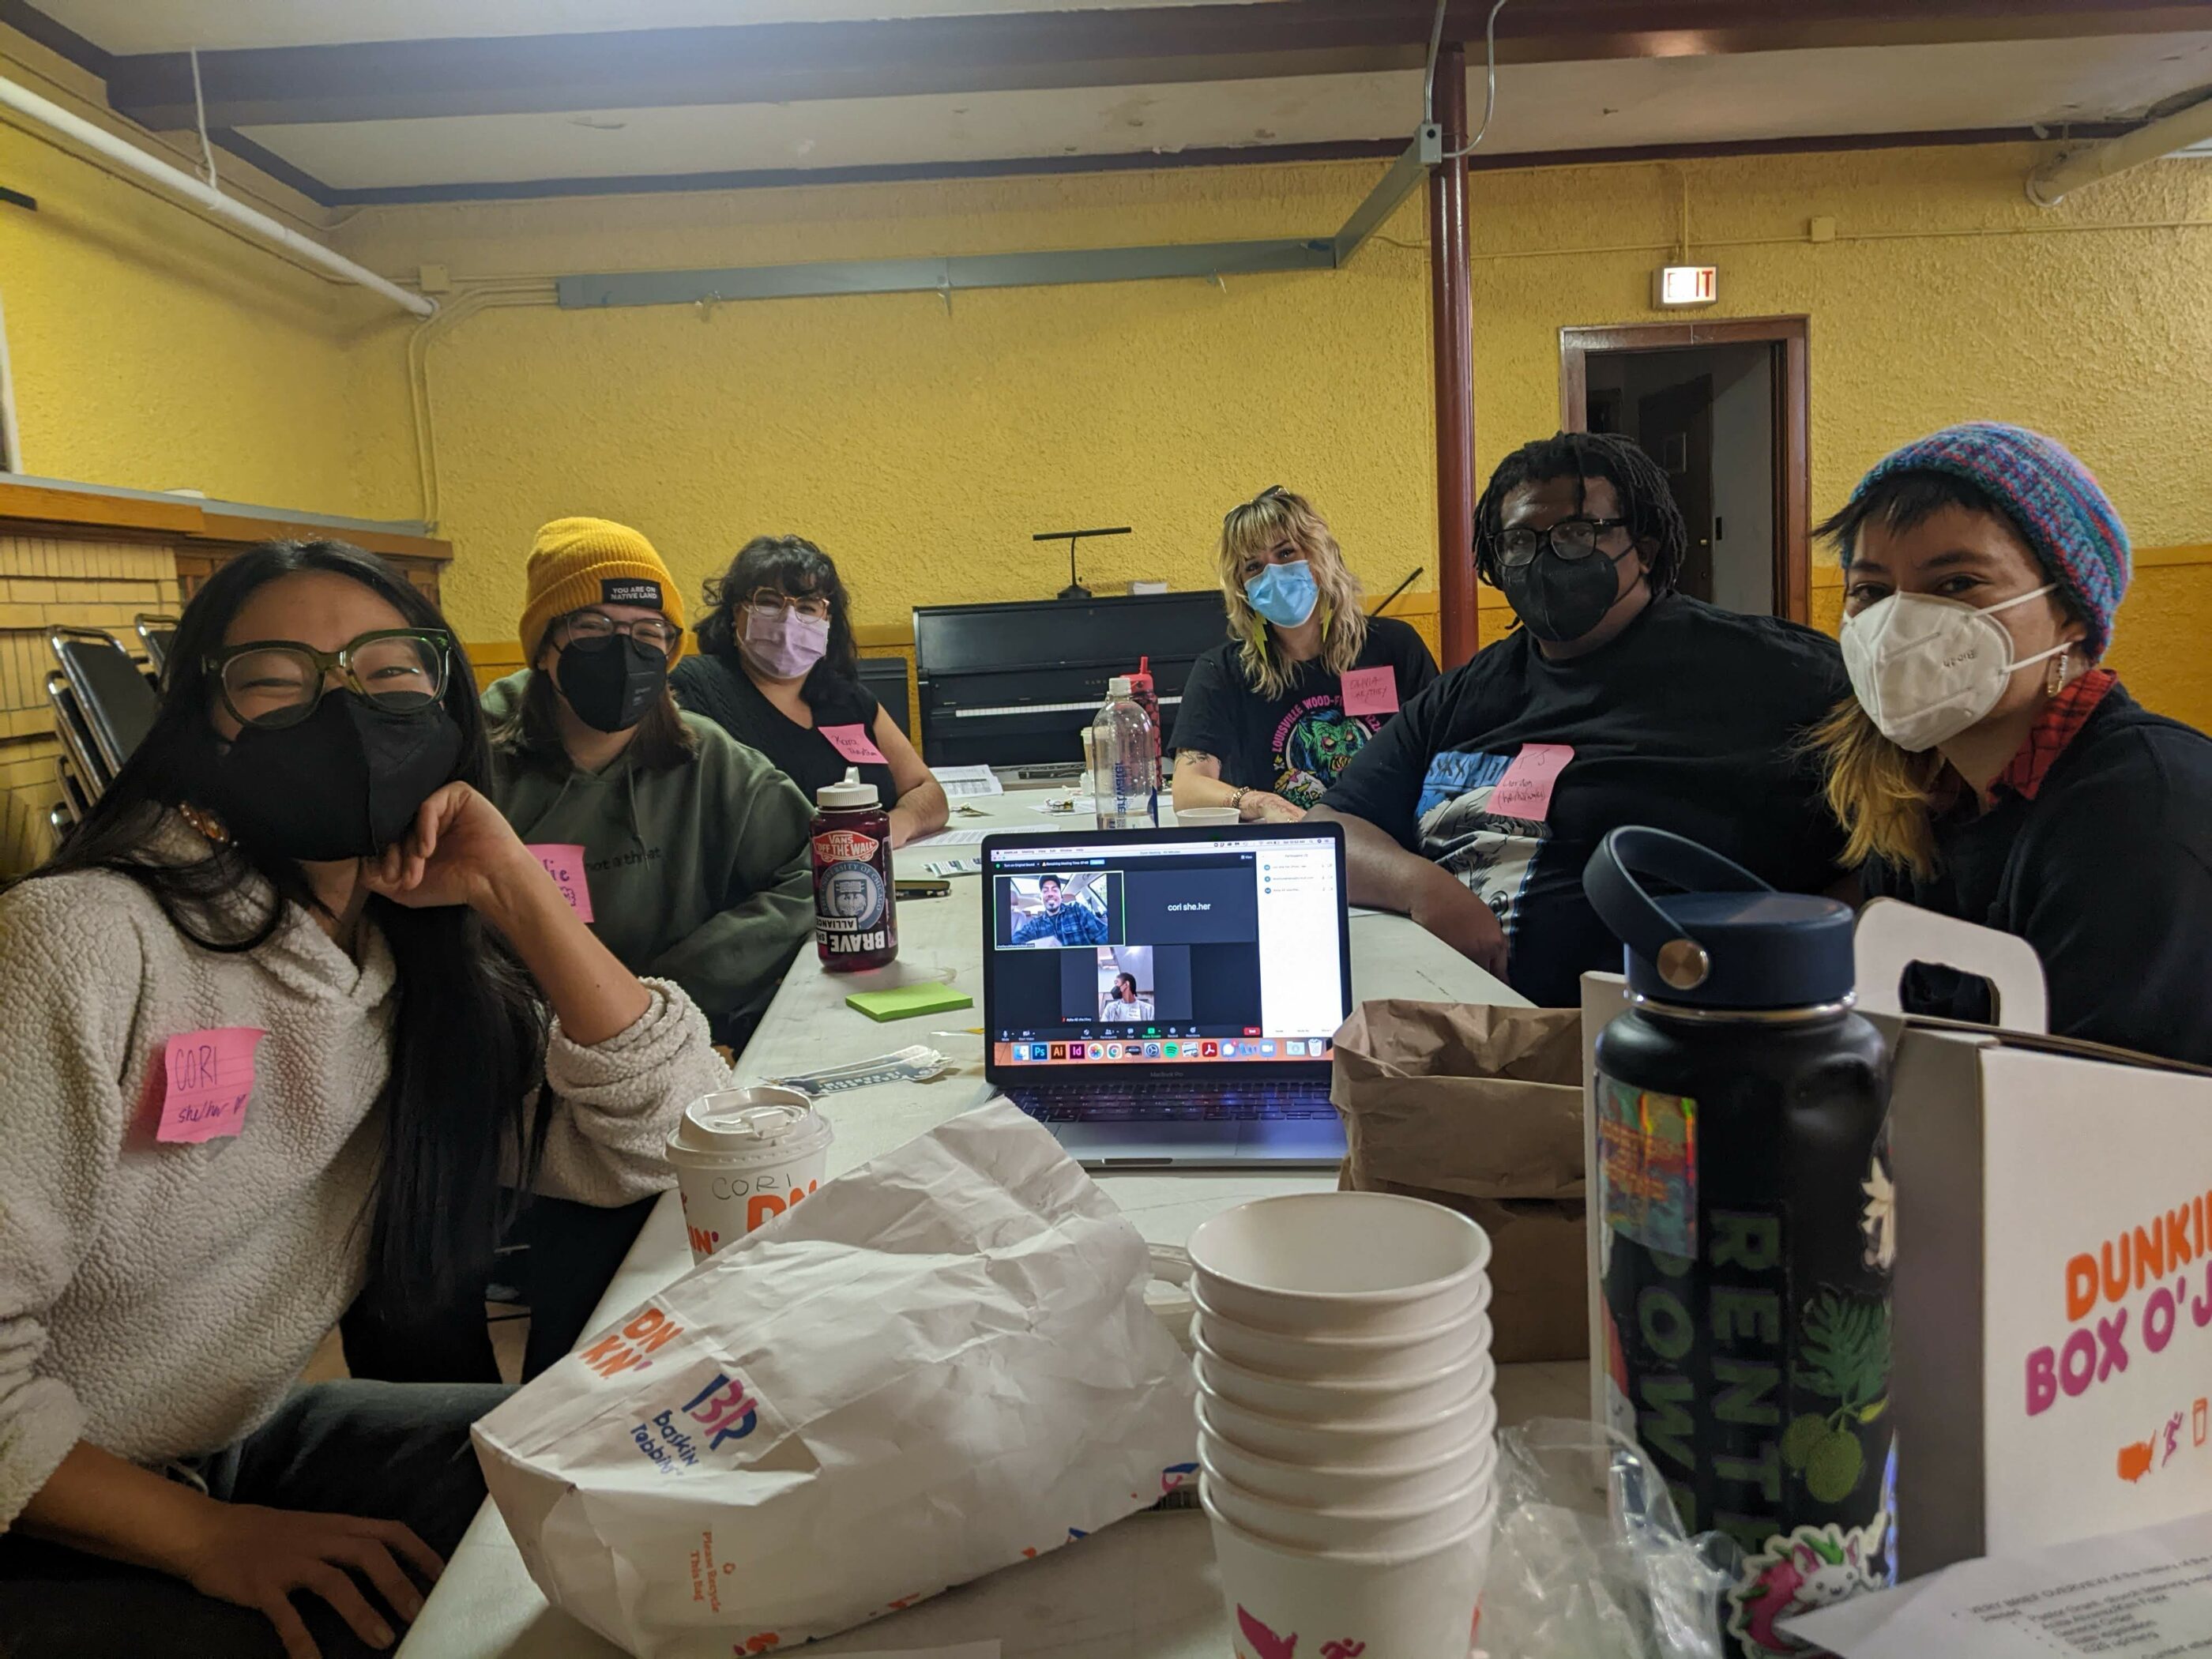 A group of artists with masks on sitting around a table